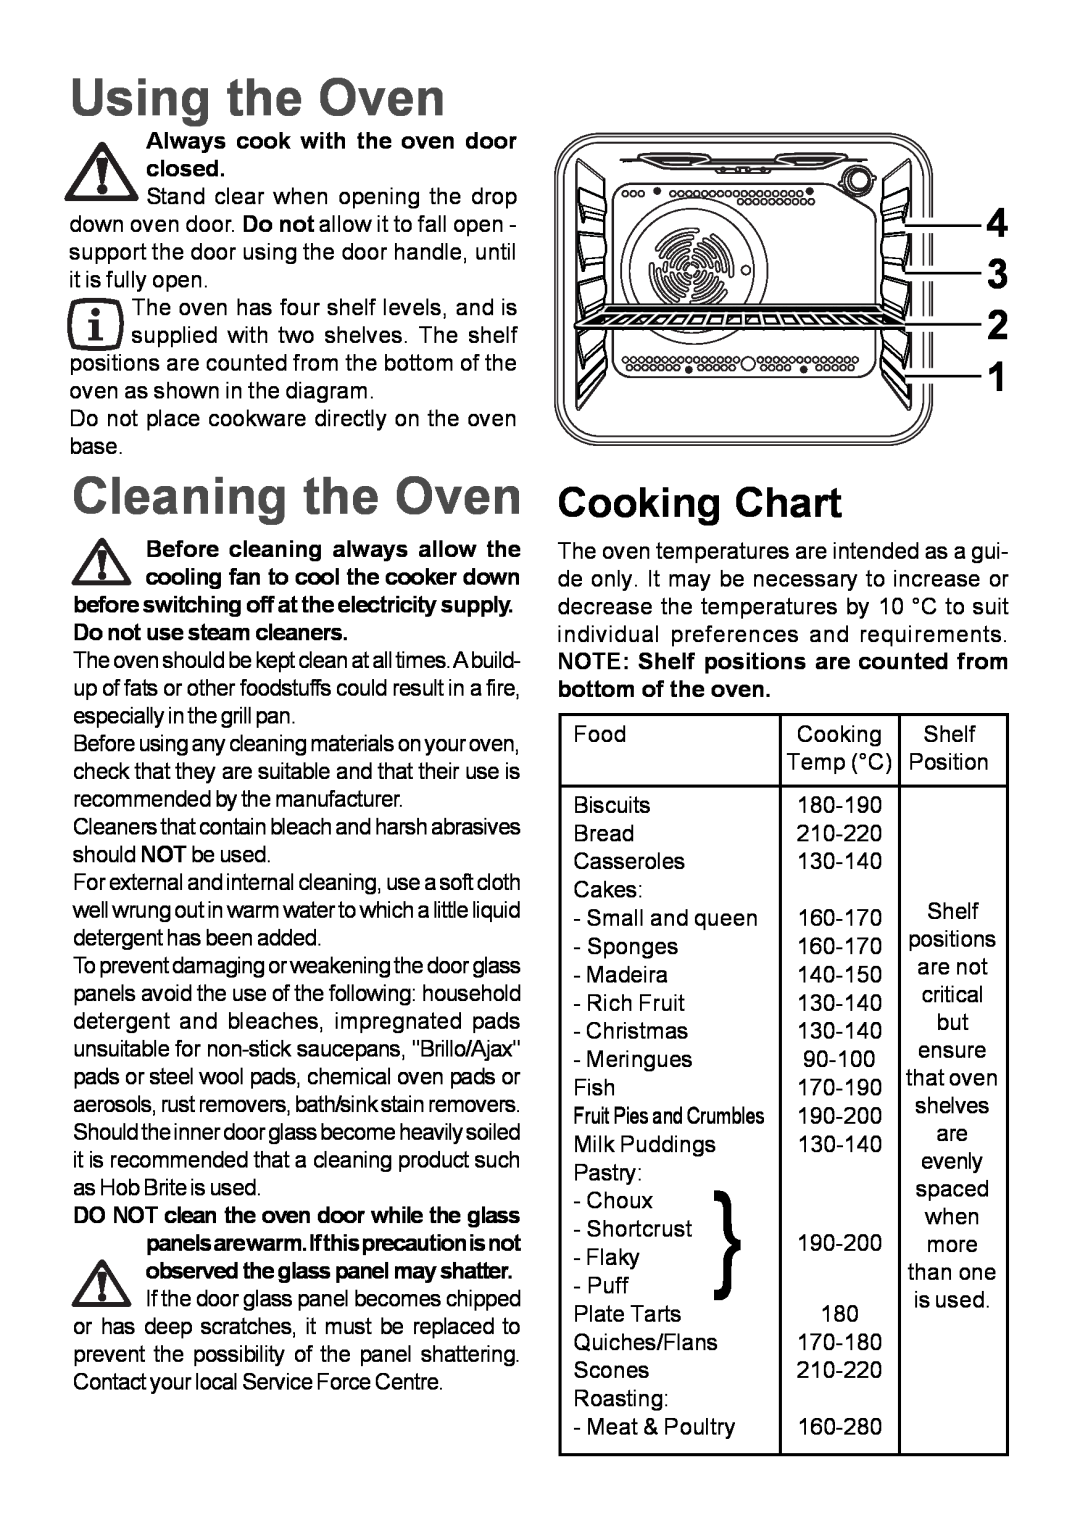 Moffat MSF 615 manual Using the Oven, Cleaning the Oven, 4 3 2 1 Cooking Chart, Always cook with the oven door closed 